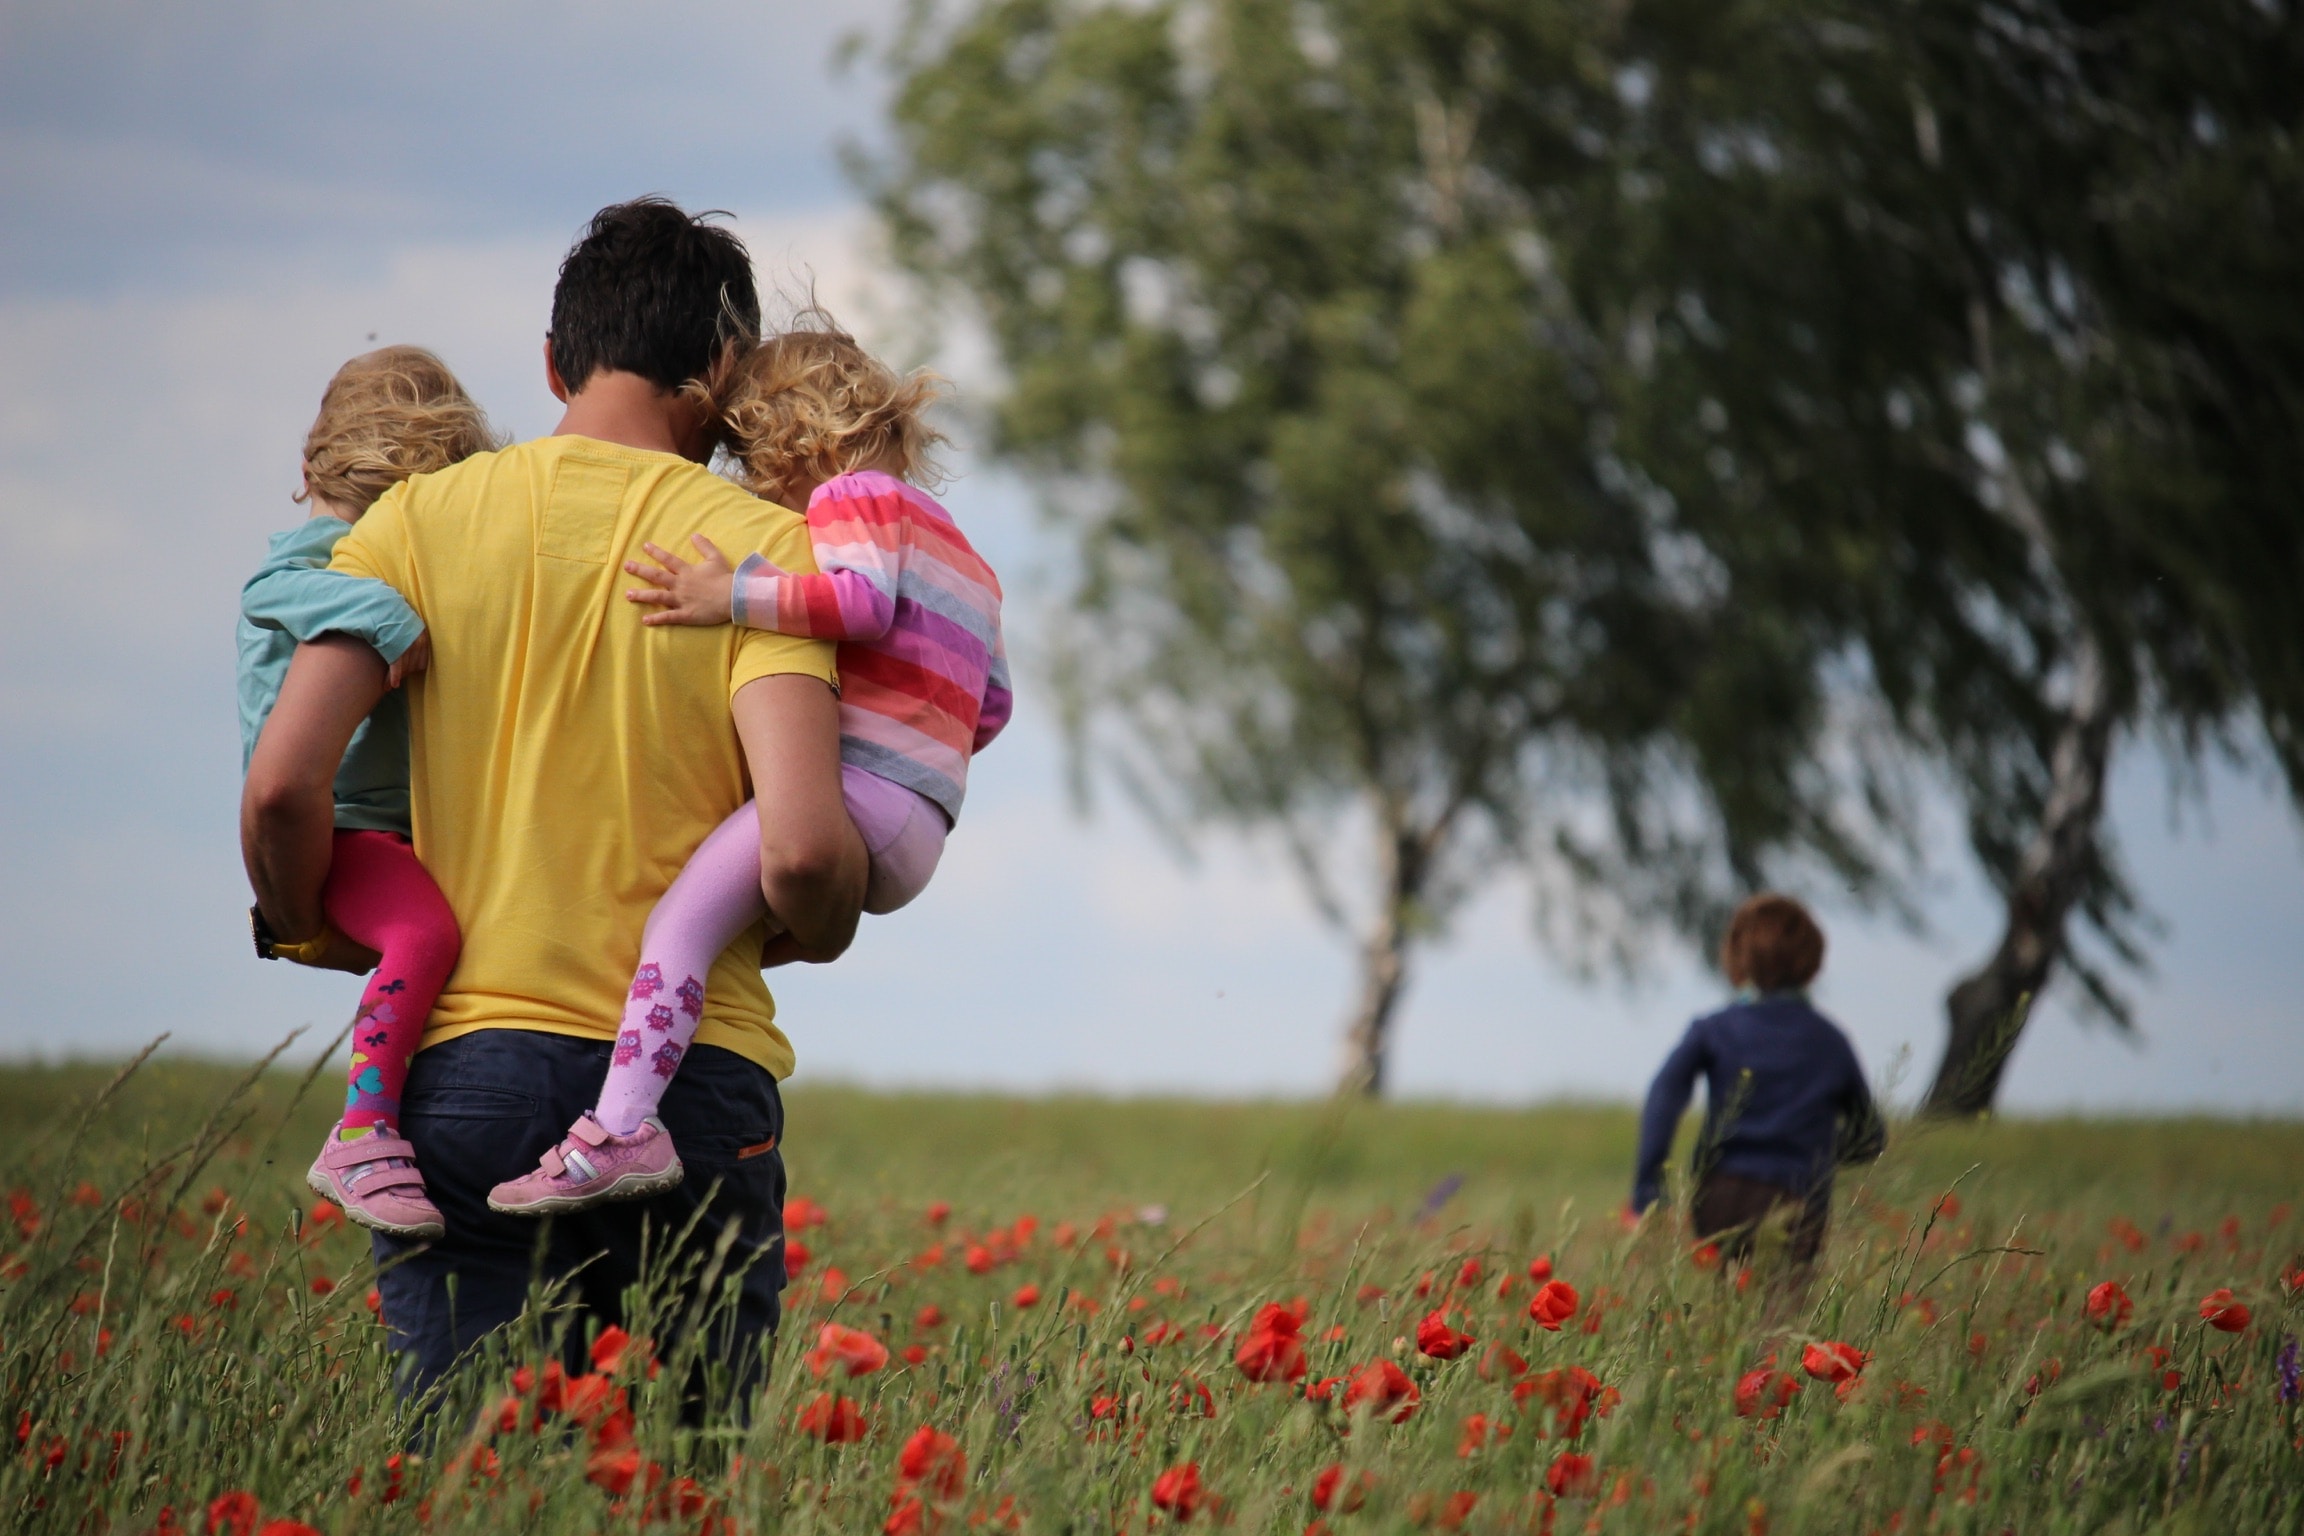 A parent carrying two children on their hips through a field with a tree. Credit: Photo by Juliane Liebermann on Unsplash